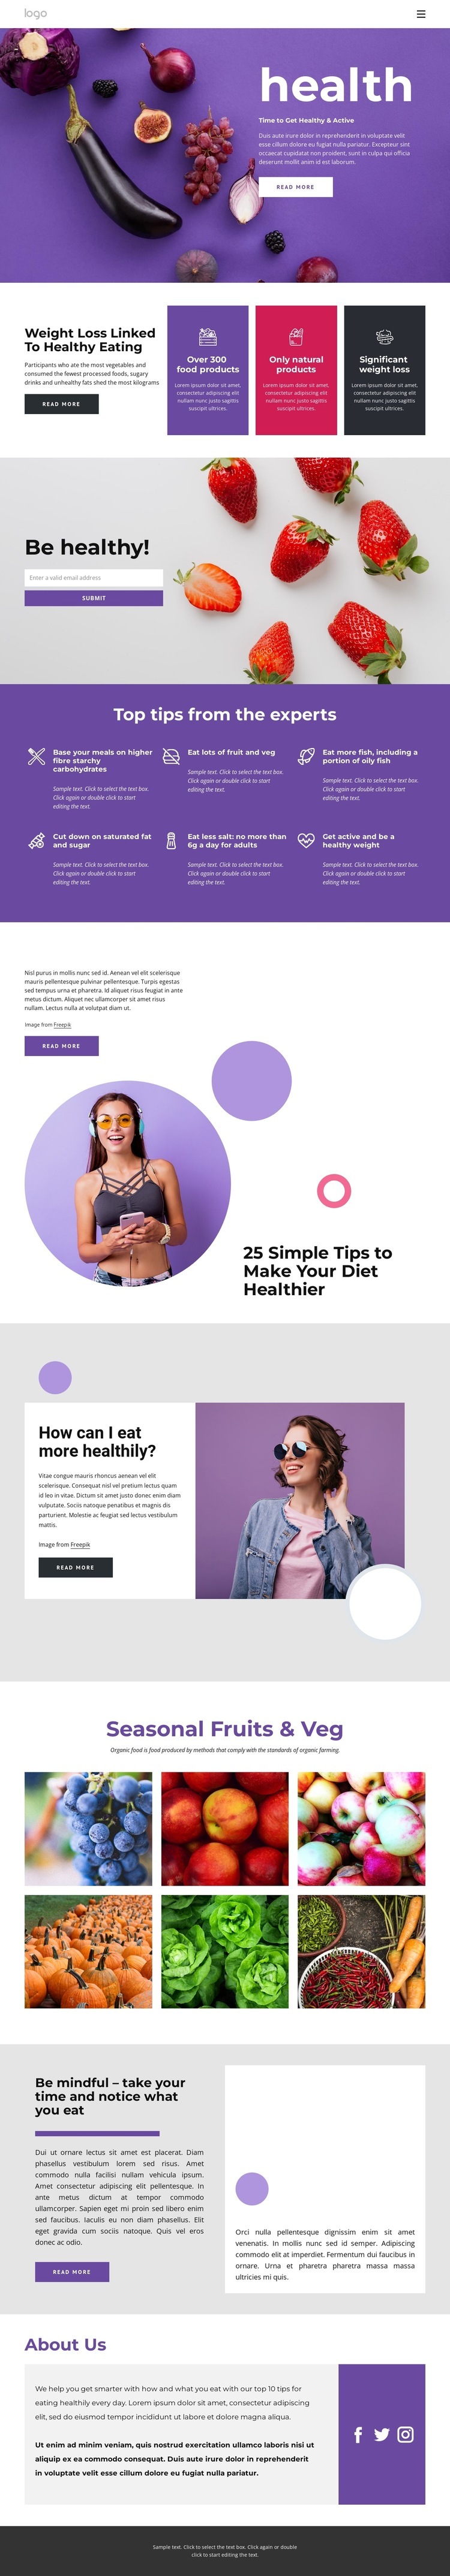 Building a healthy and balanced diet Web Page Design